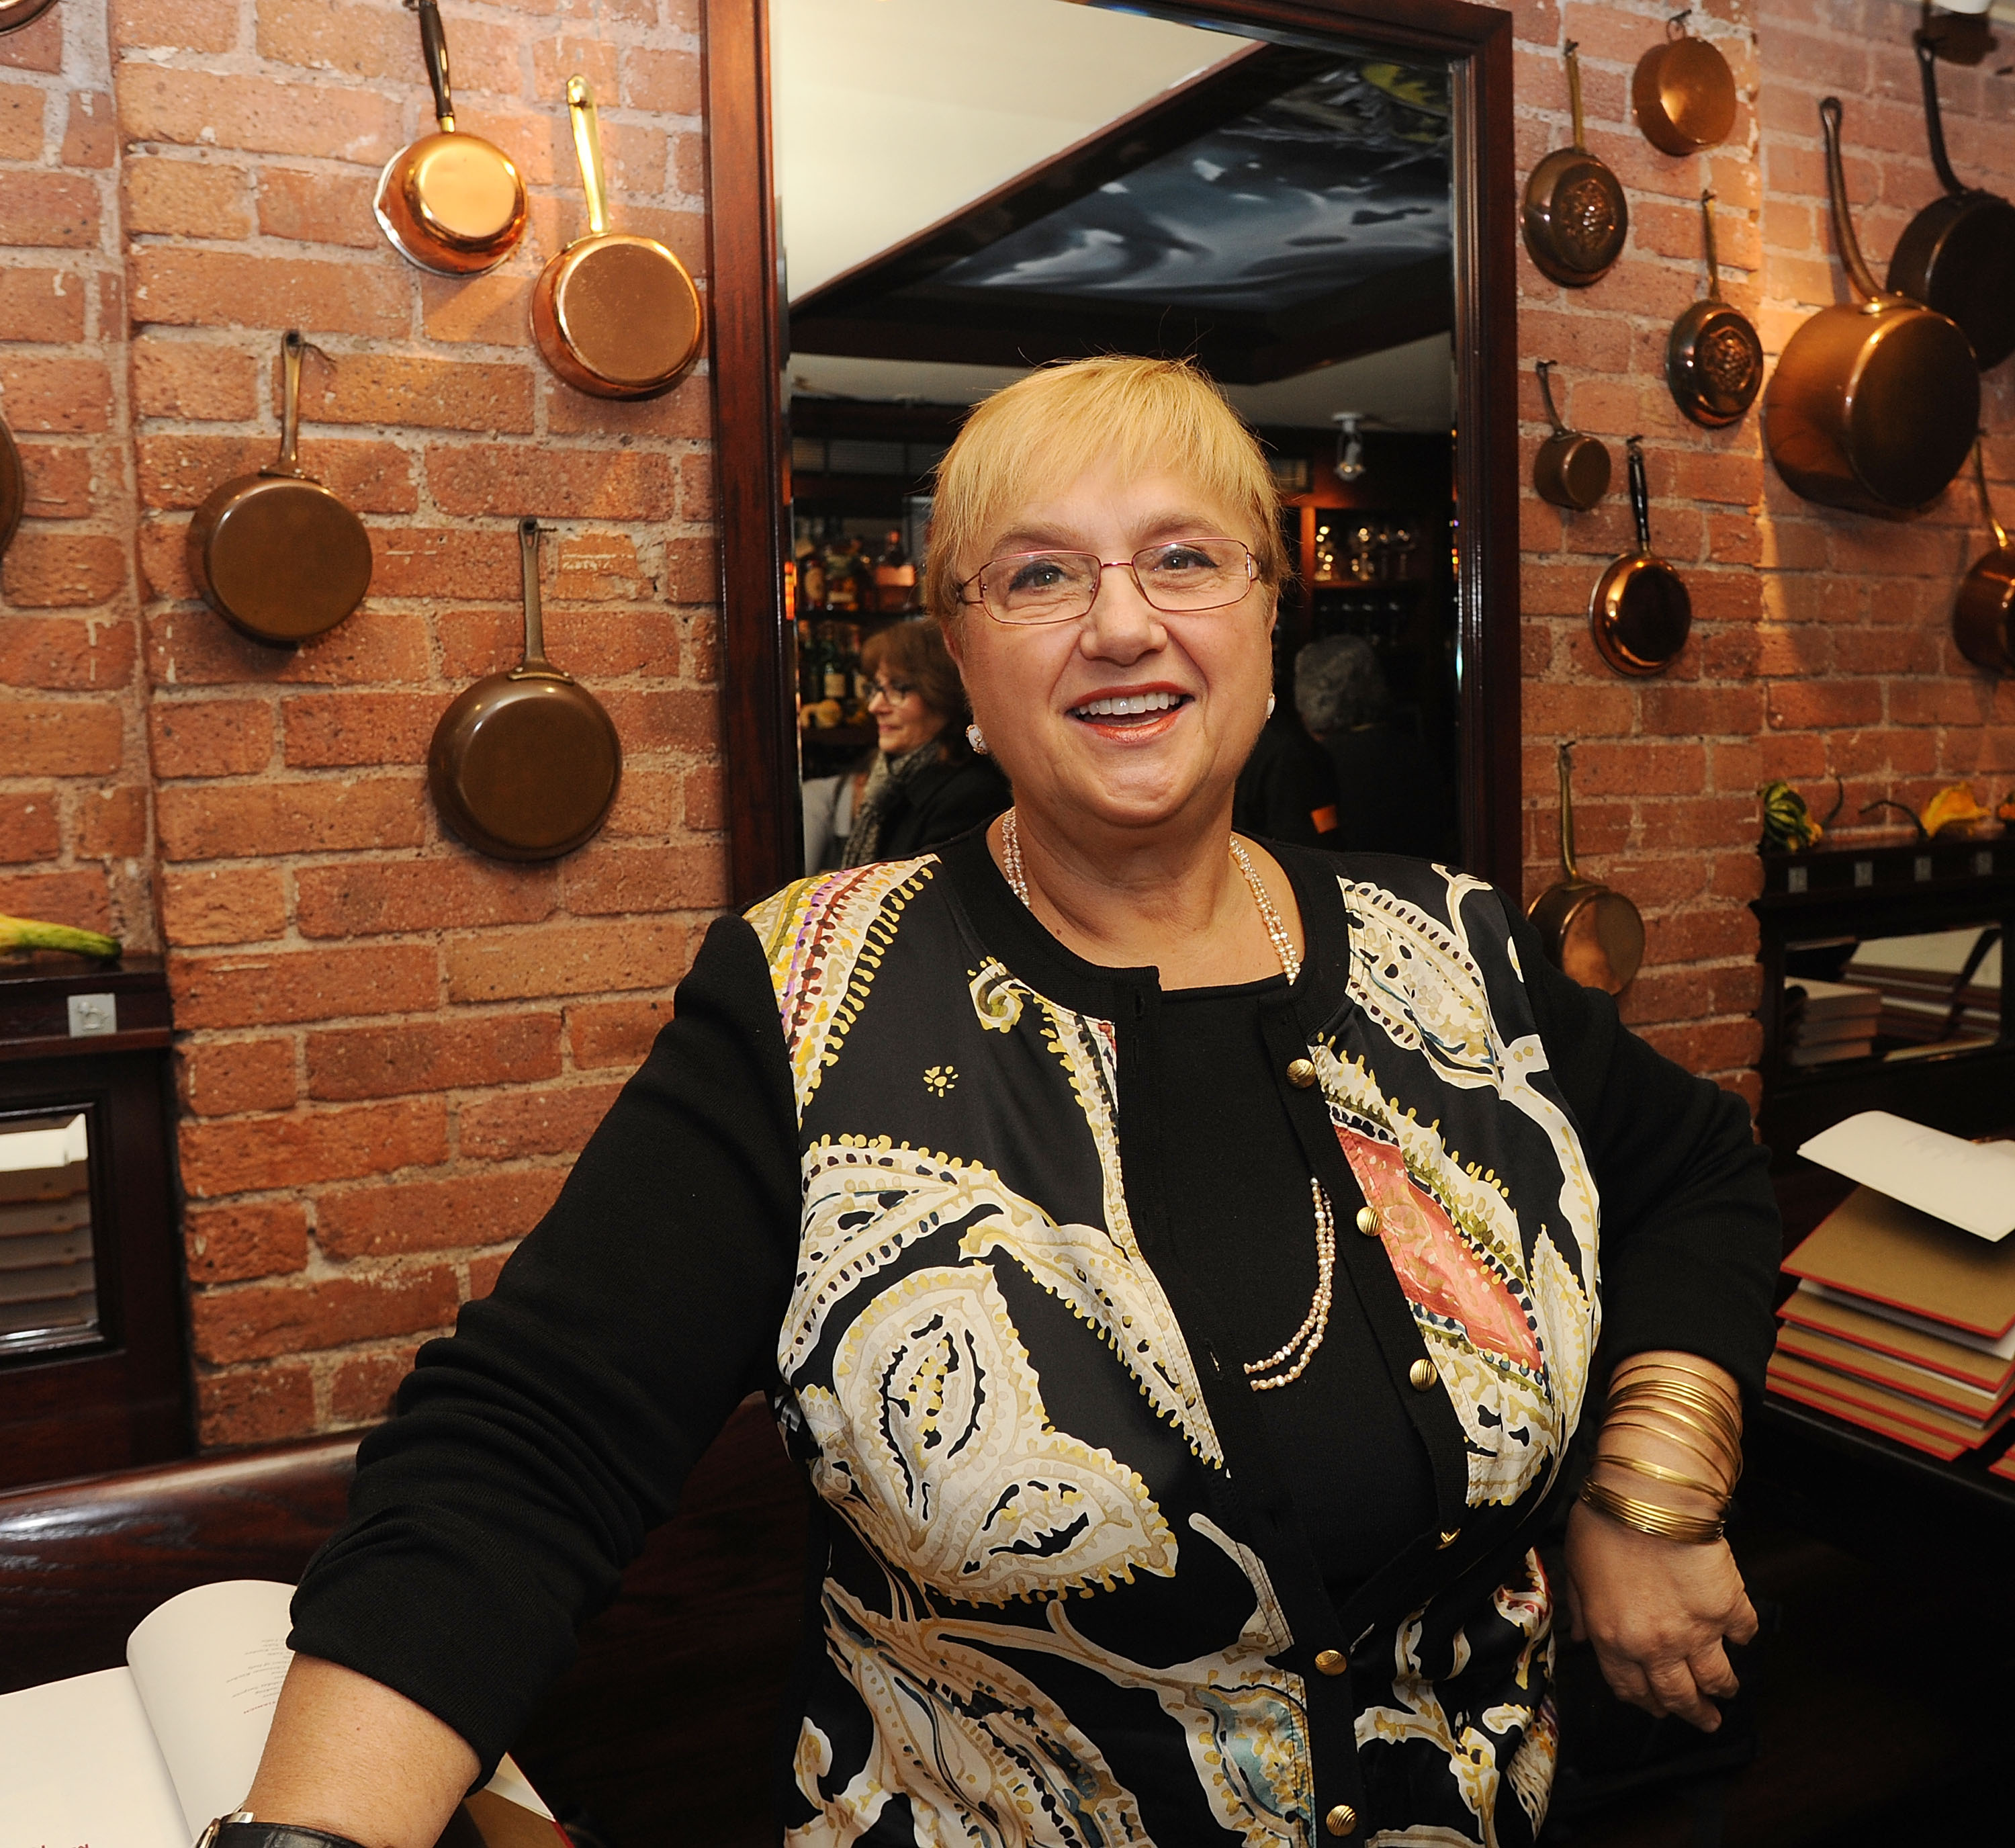 Lidia Bastianich wears glasses and a white blouse as she smiles in this photograph.